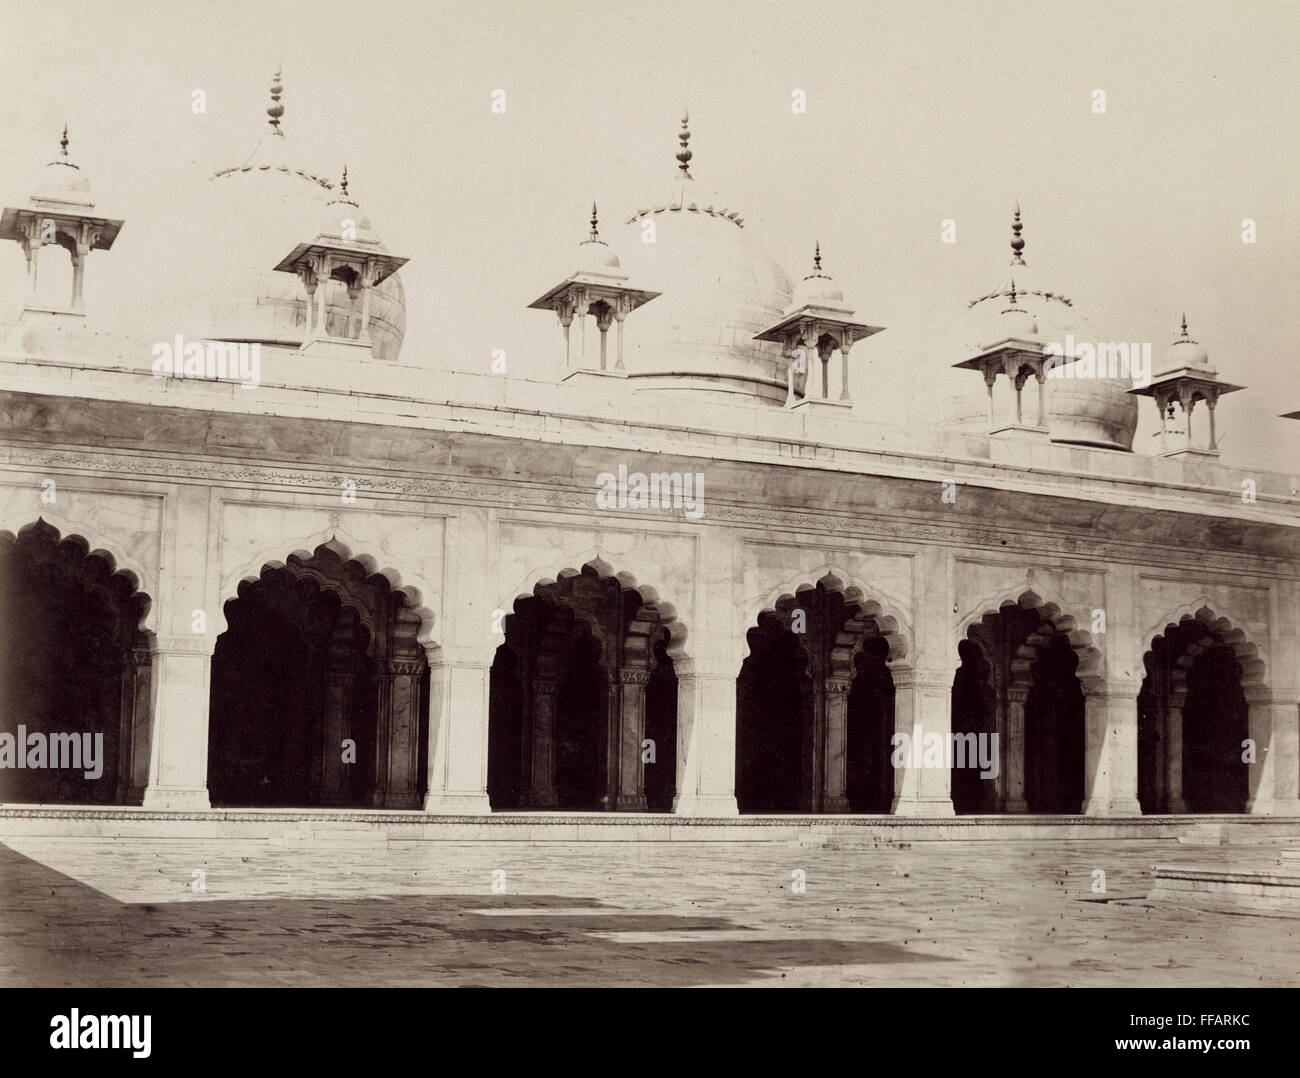 INDIA: PEARL MOSQUE. /nExterior of the Pearl Mosque at Delhi. The Pearl ...